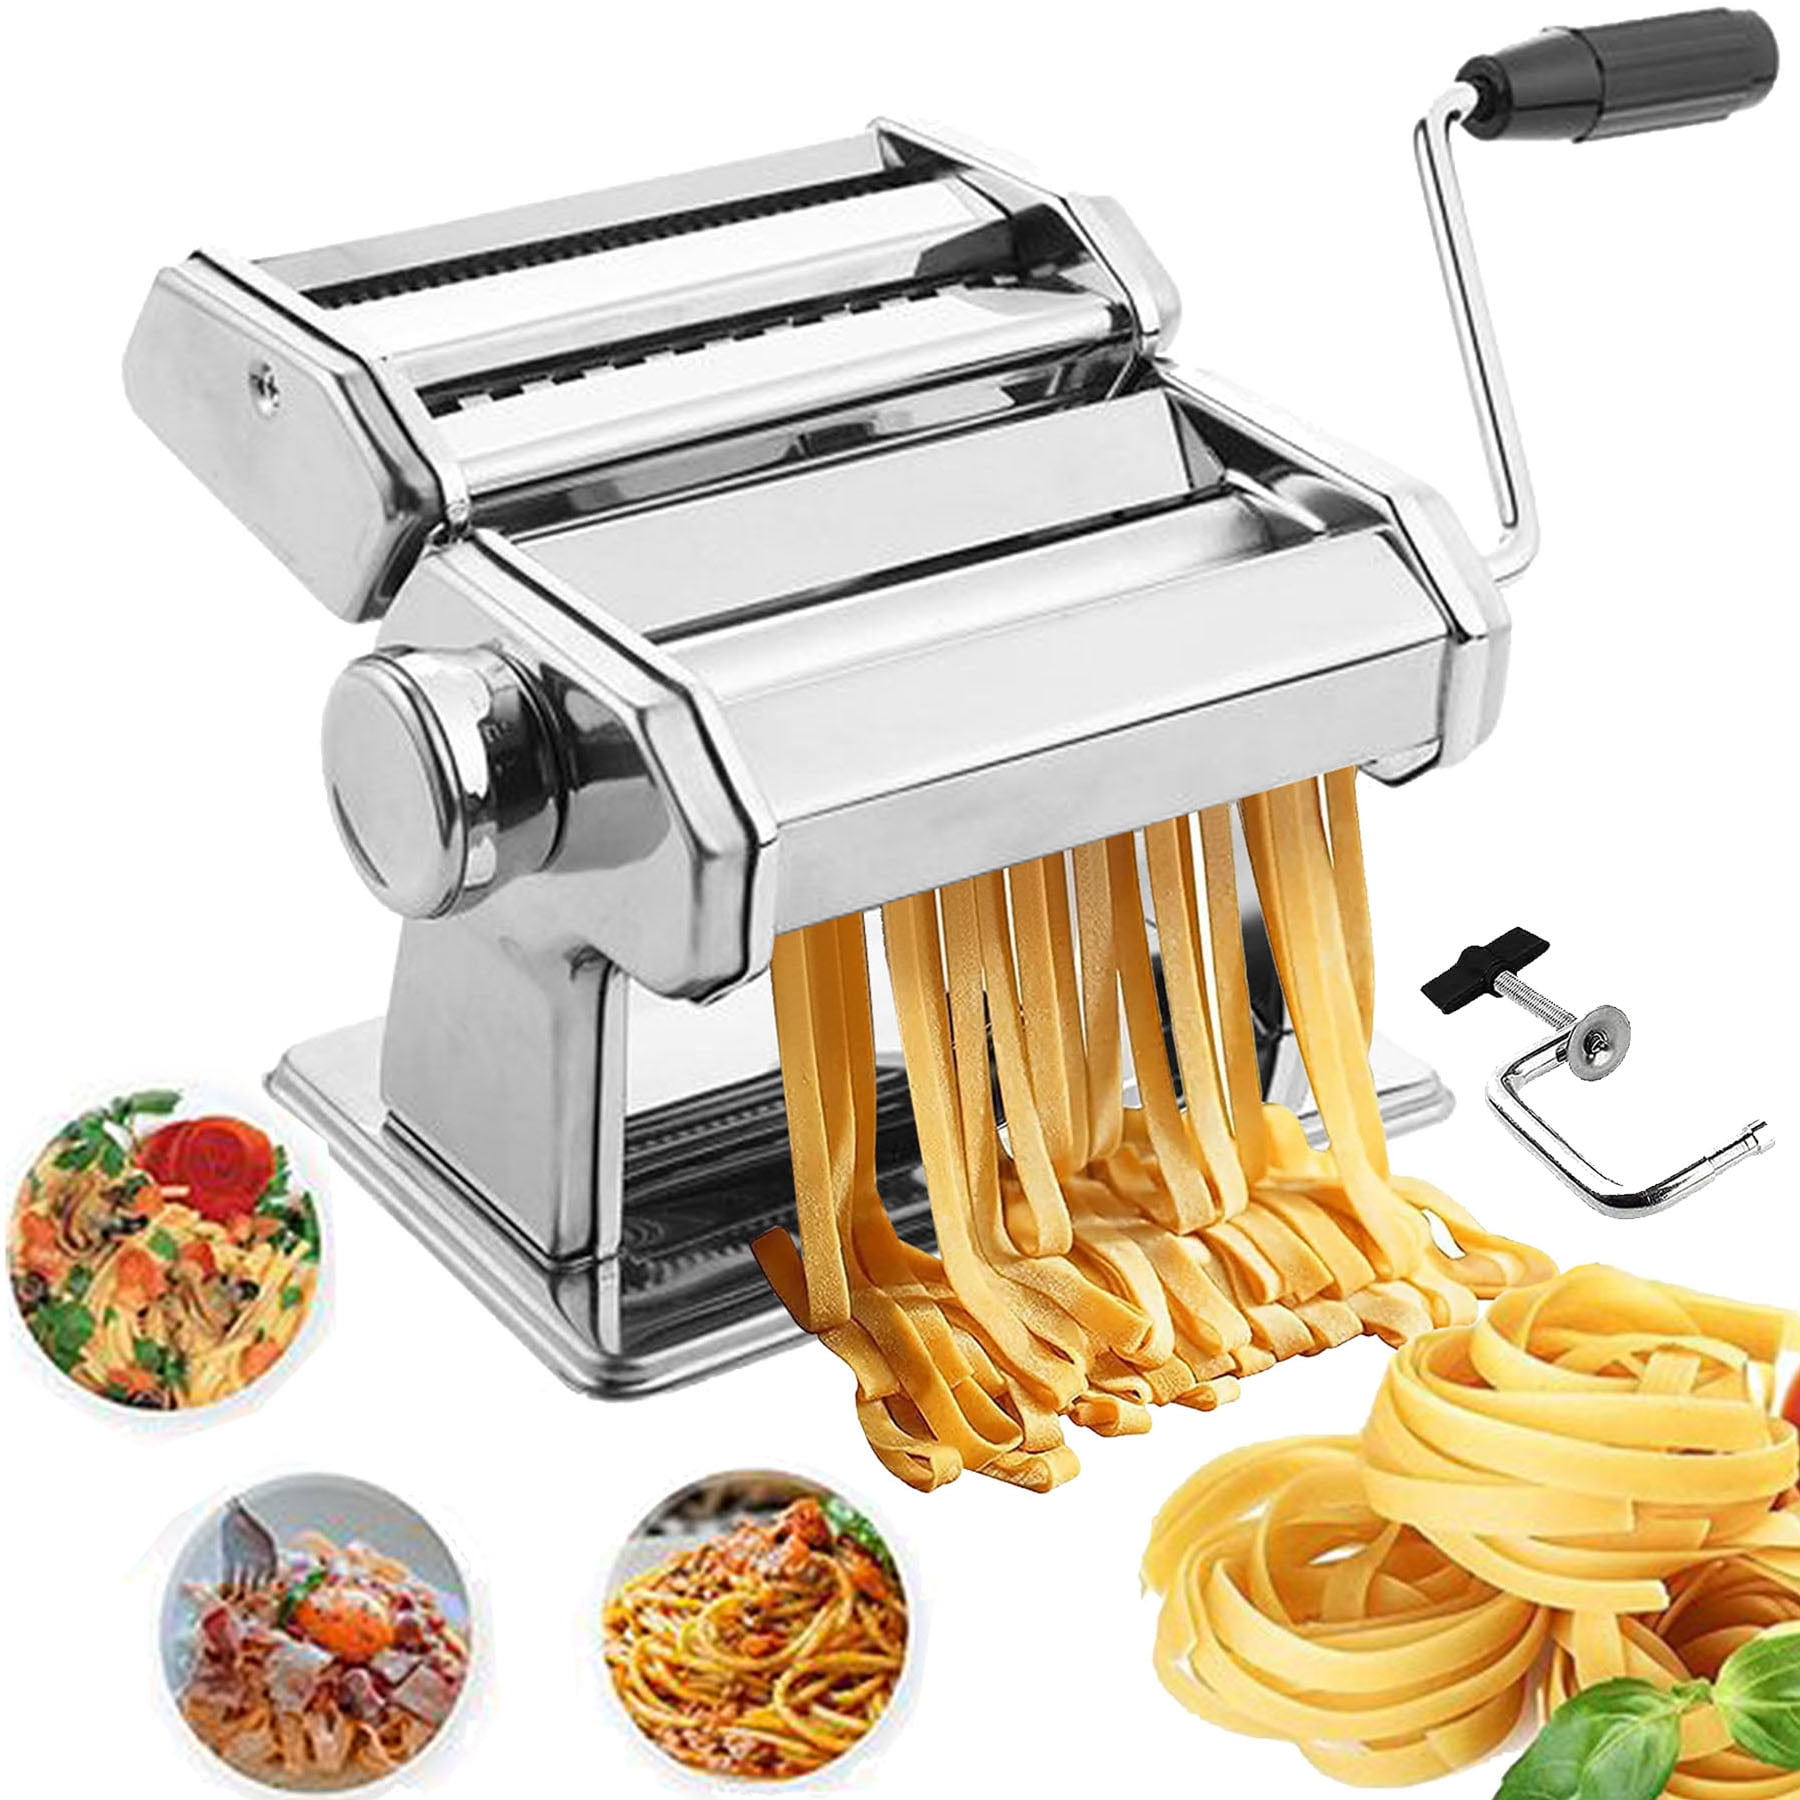 Suit for Homemade Spaghetti Lasagna or Dumpling Skins FOCOLABU Pasta Machine Stainless Steel Manual Pasta Maker Machine with 8 Adjustable Thickness Settings Fettuccini Pasta Maker 